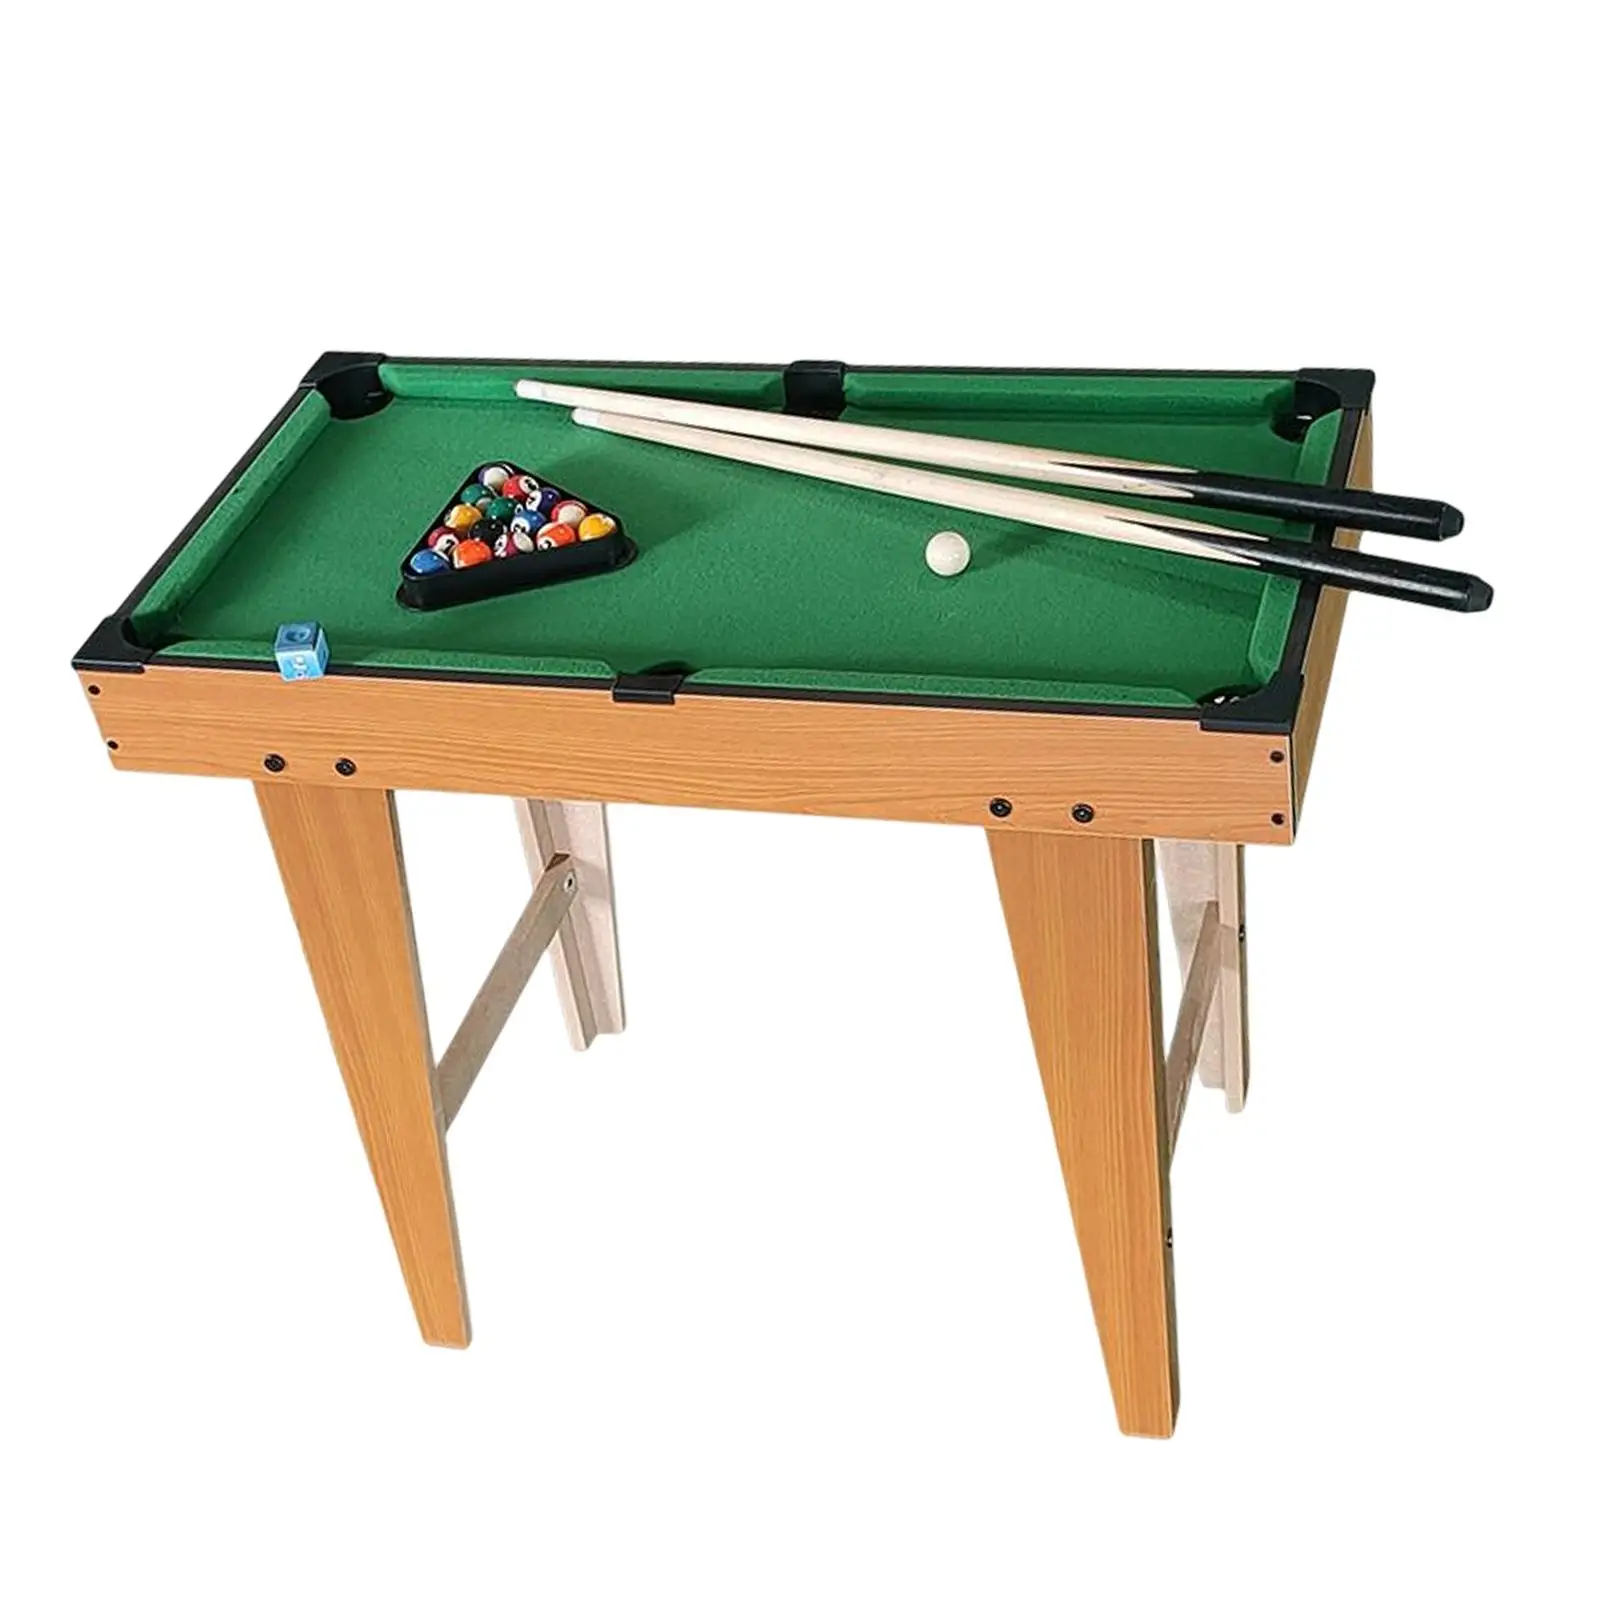 Durable Pool Table Set 15 Colorful Balls, 1 Cue Ball Chalk, Triangle Rack Home